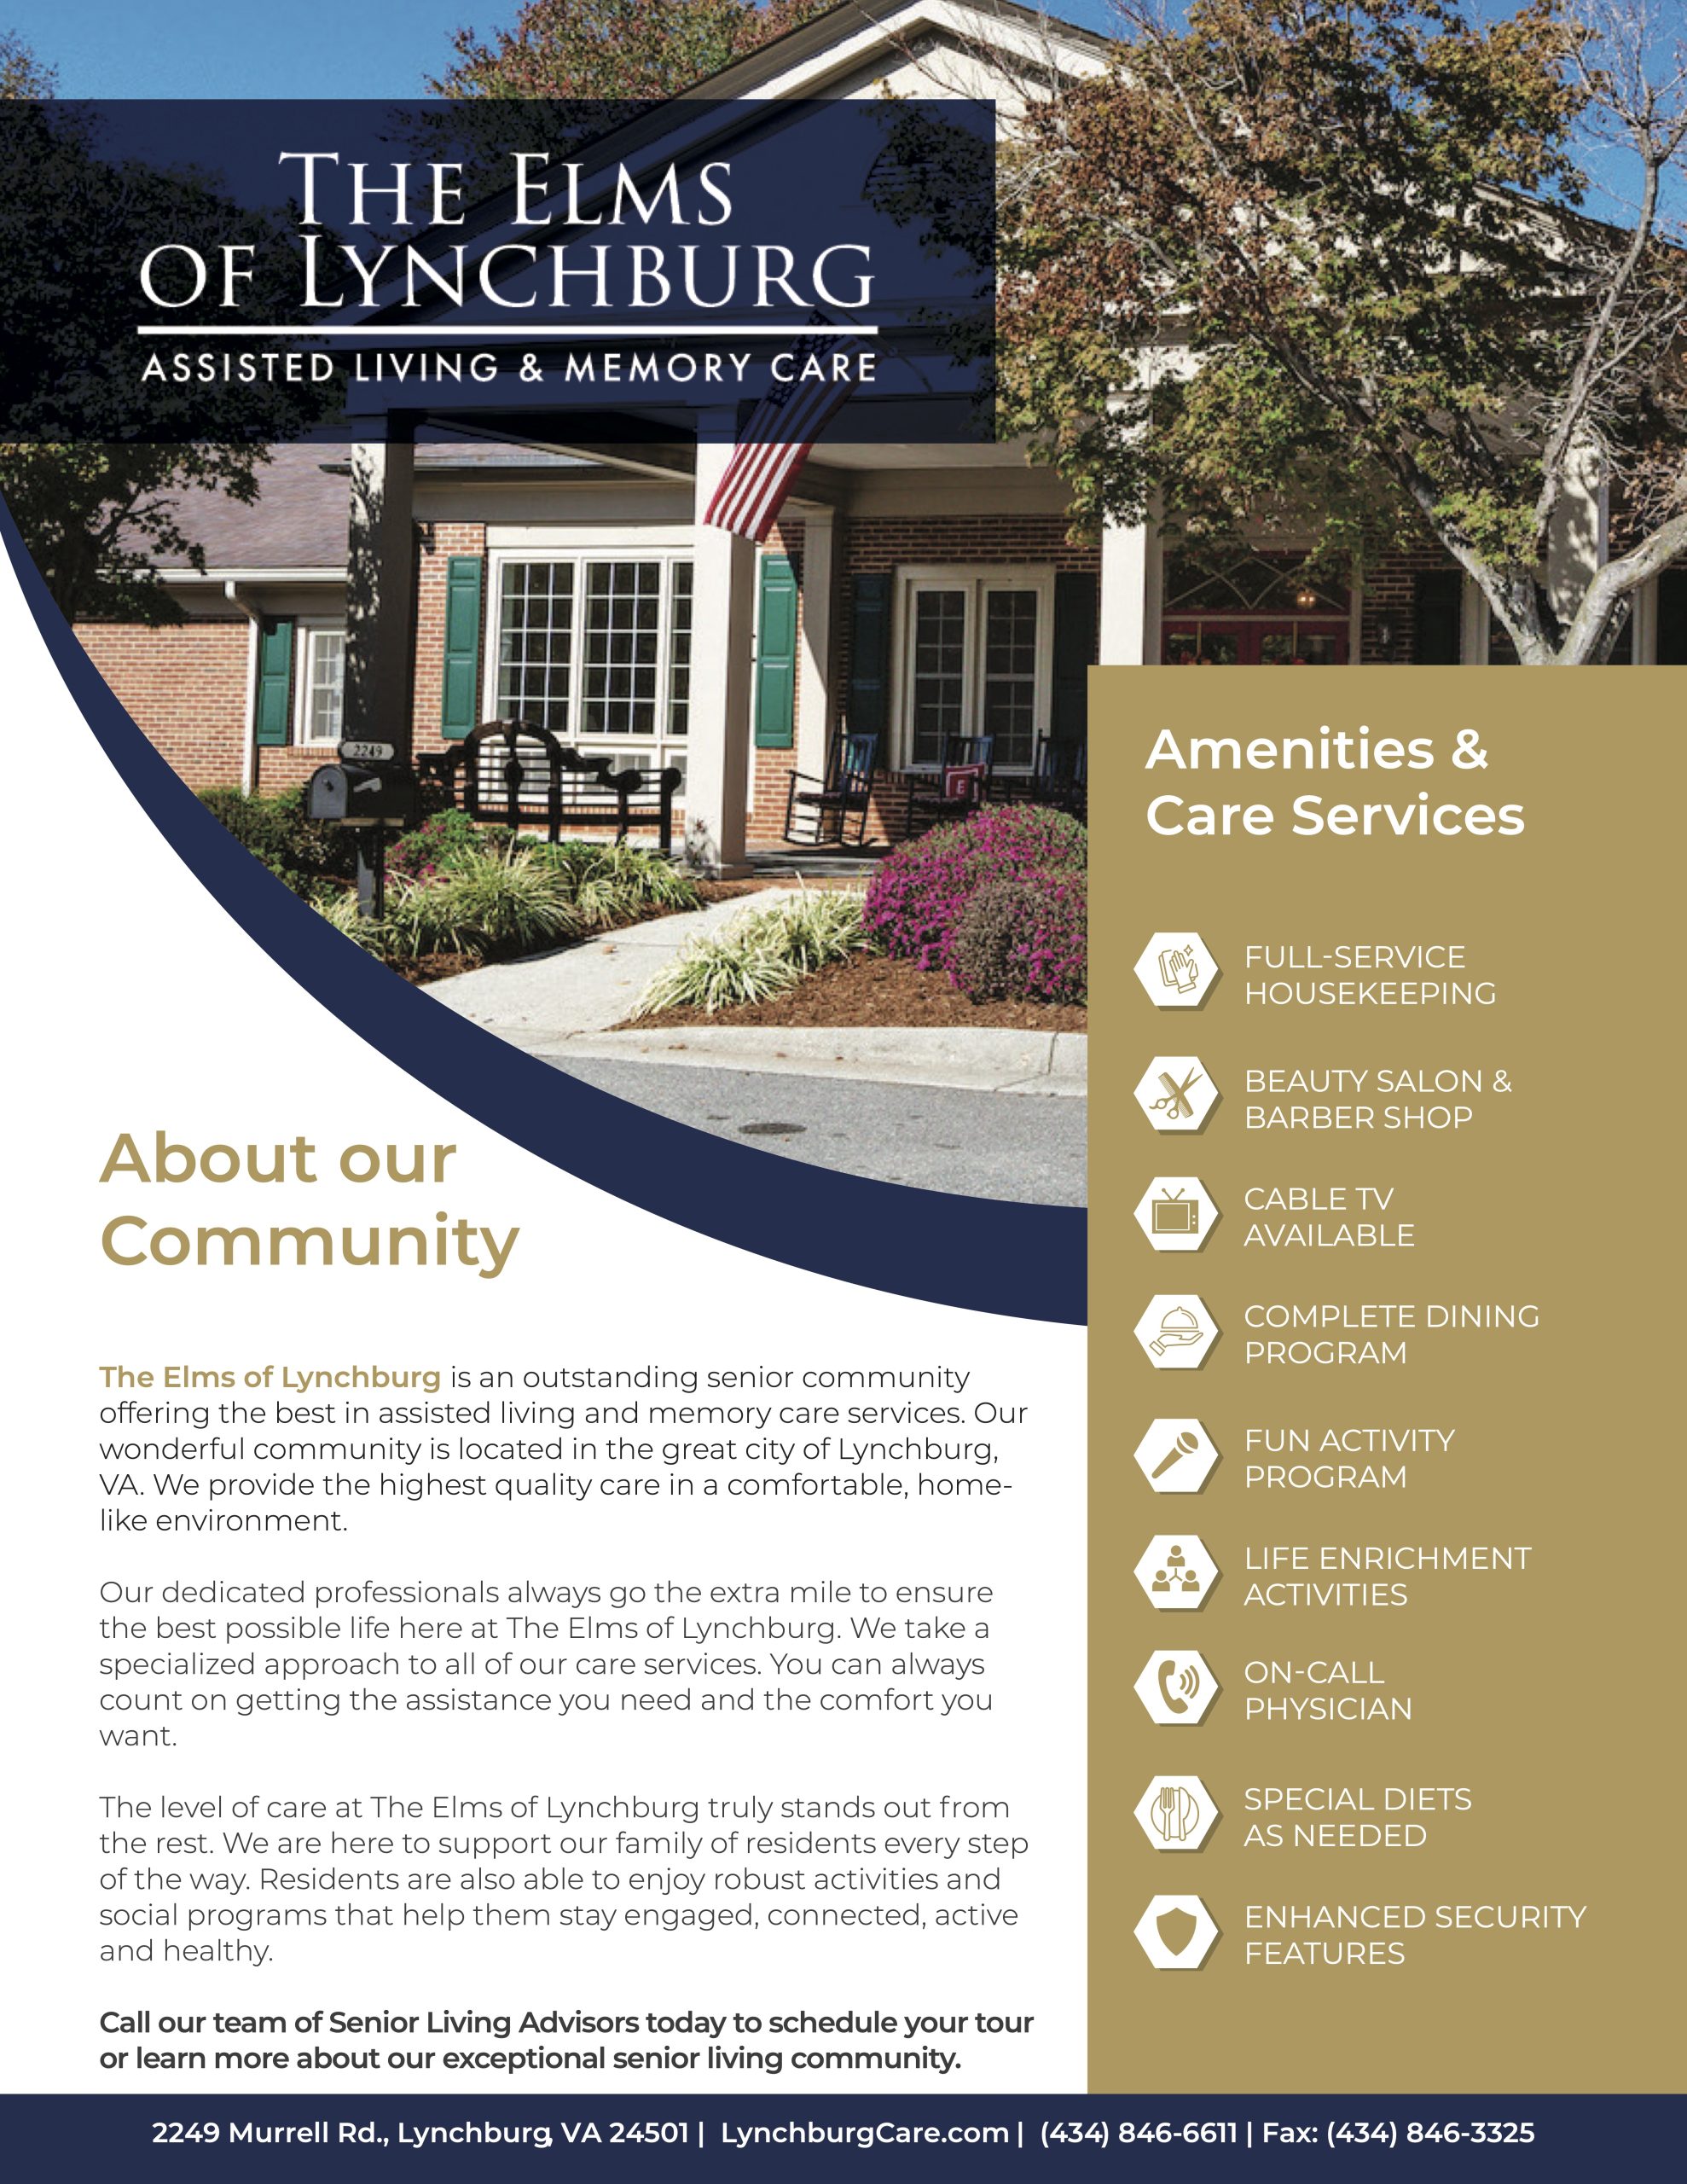 Elms of Lynchburg- About our Services